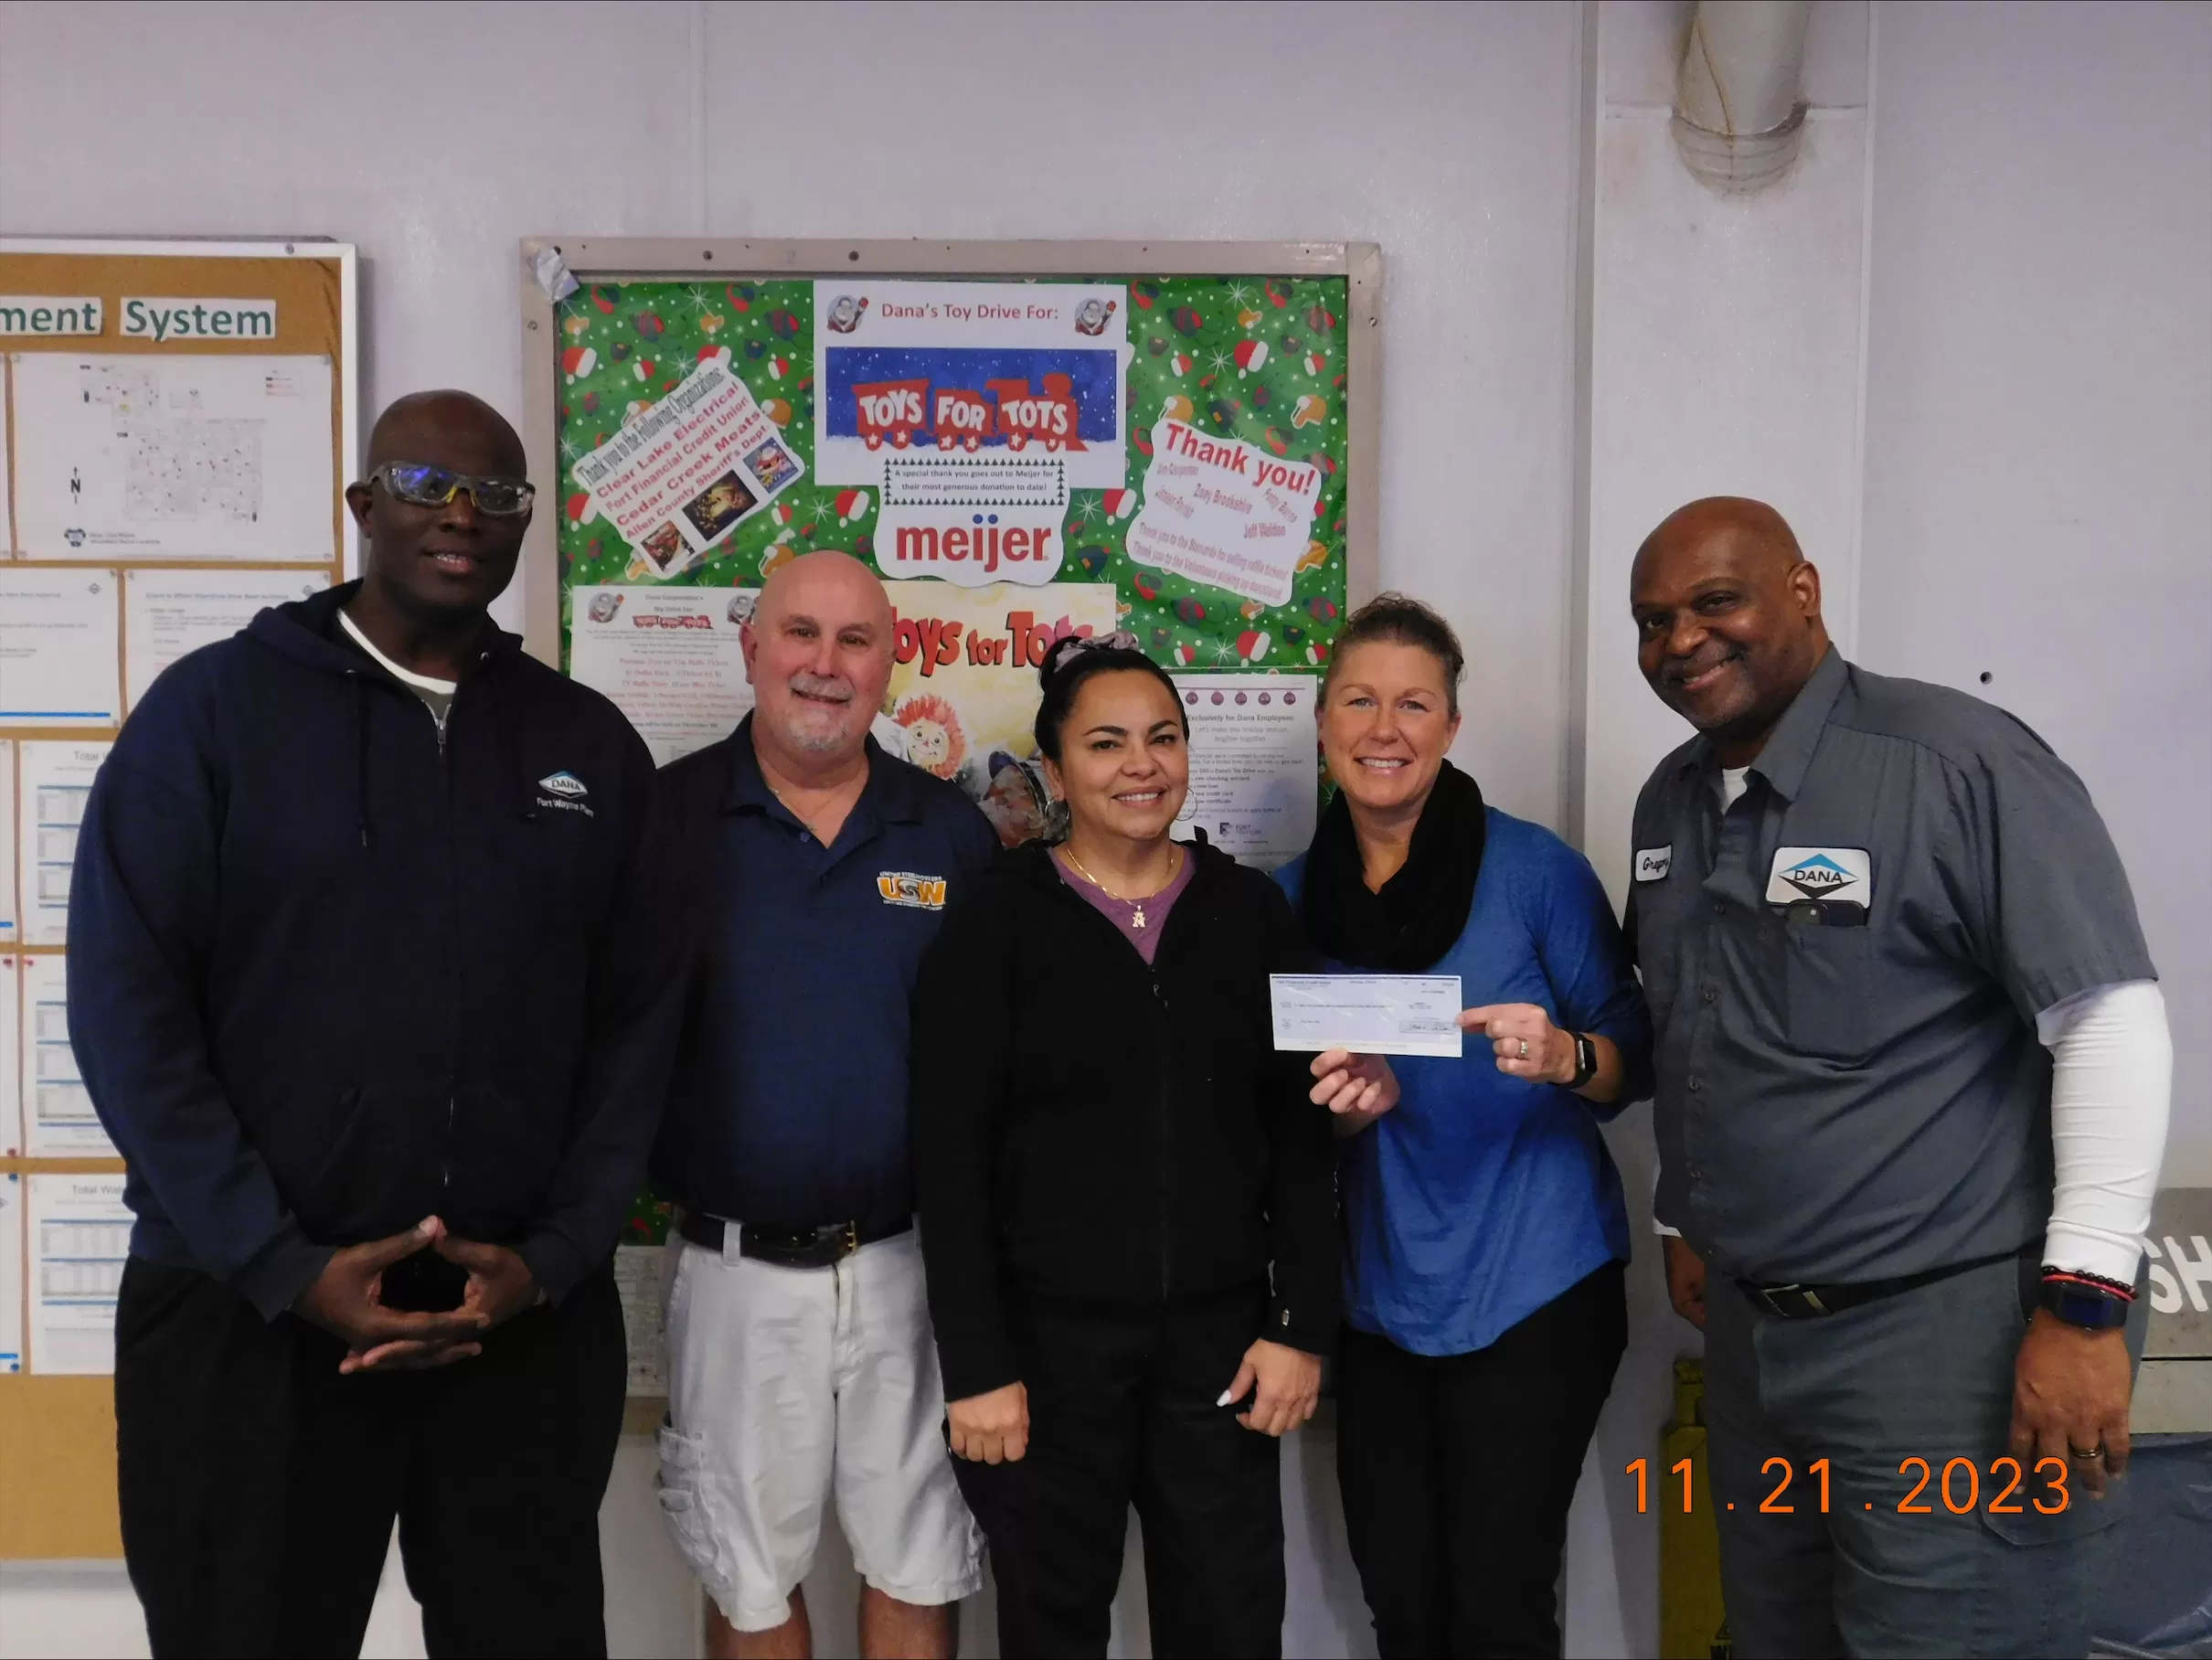 Jessica Menor presents $2,100 check to Dana Corp. employees for annual holiday toy drive